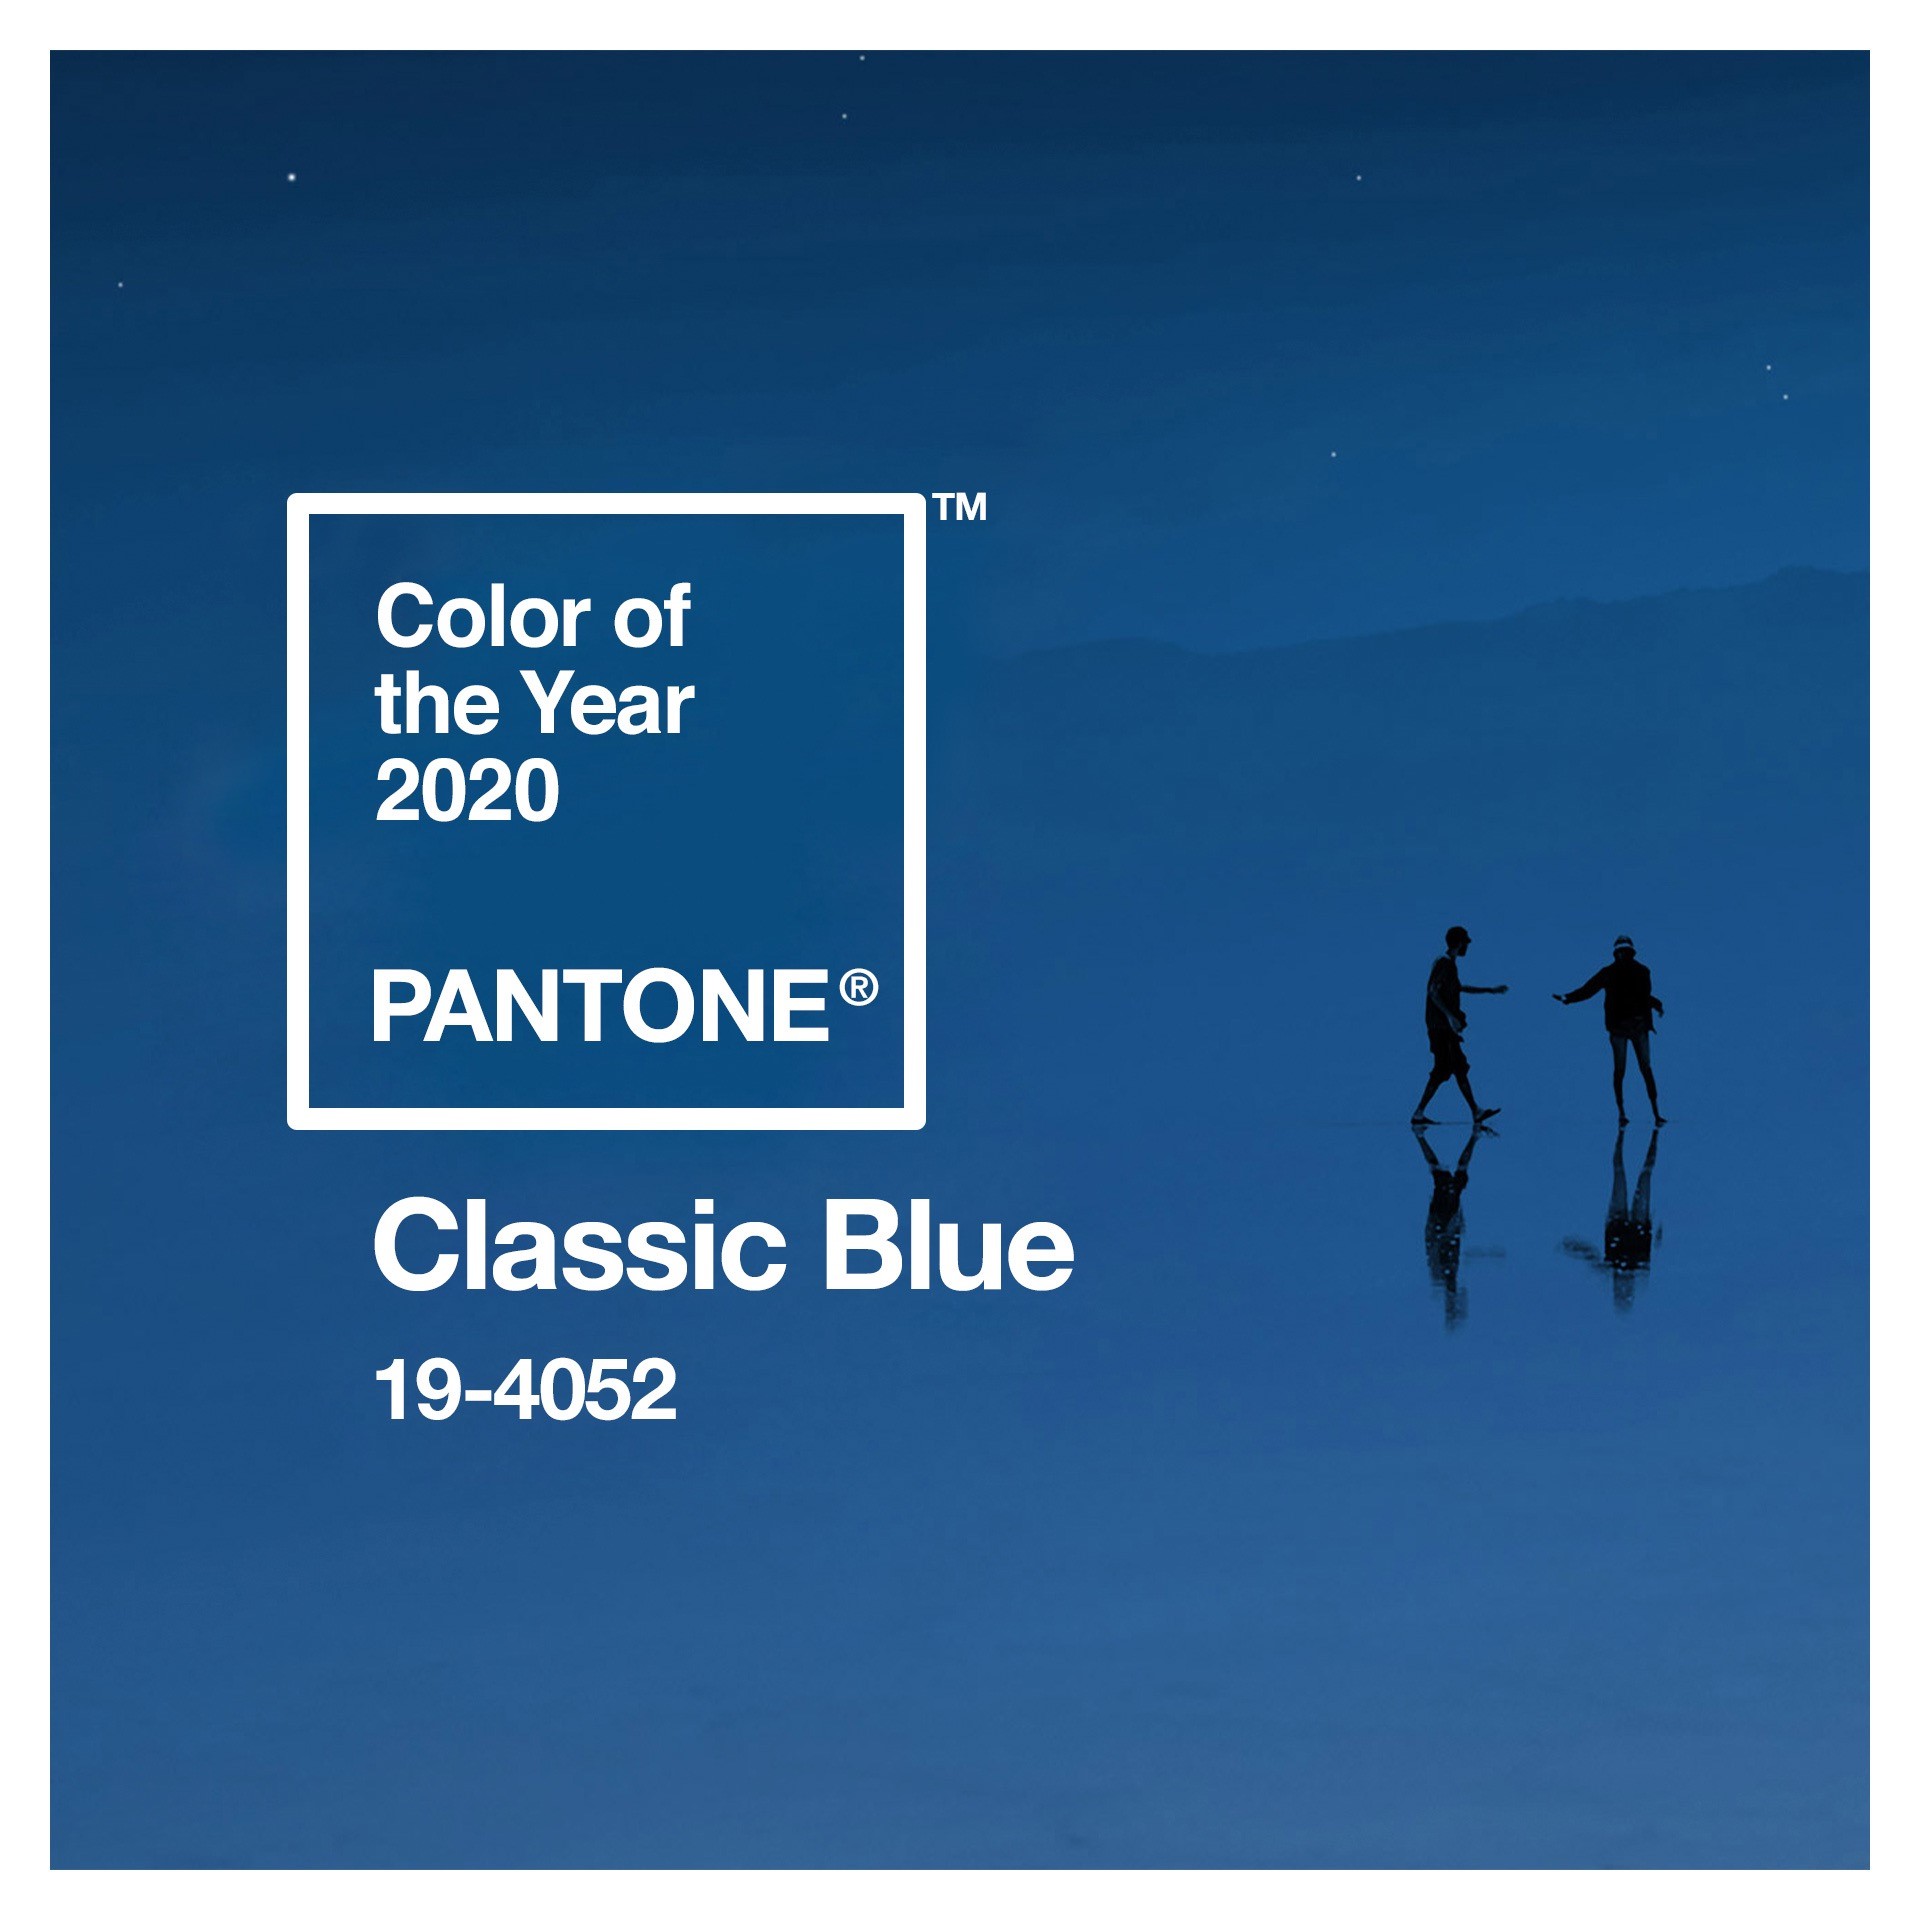 Mavi Jeans on Twitter: "The Pantone Color of the Year 2020: Classic Blue It  represents stability, resilience, calmness and connection, and is  suggestive of the sky and nature. It is the color